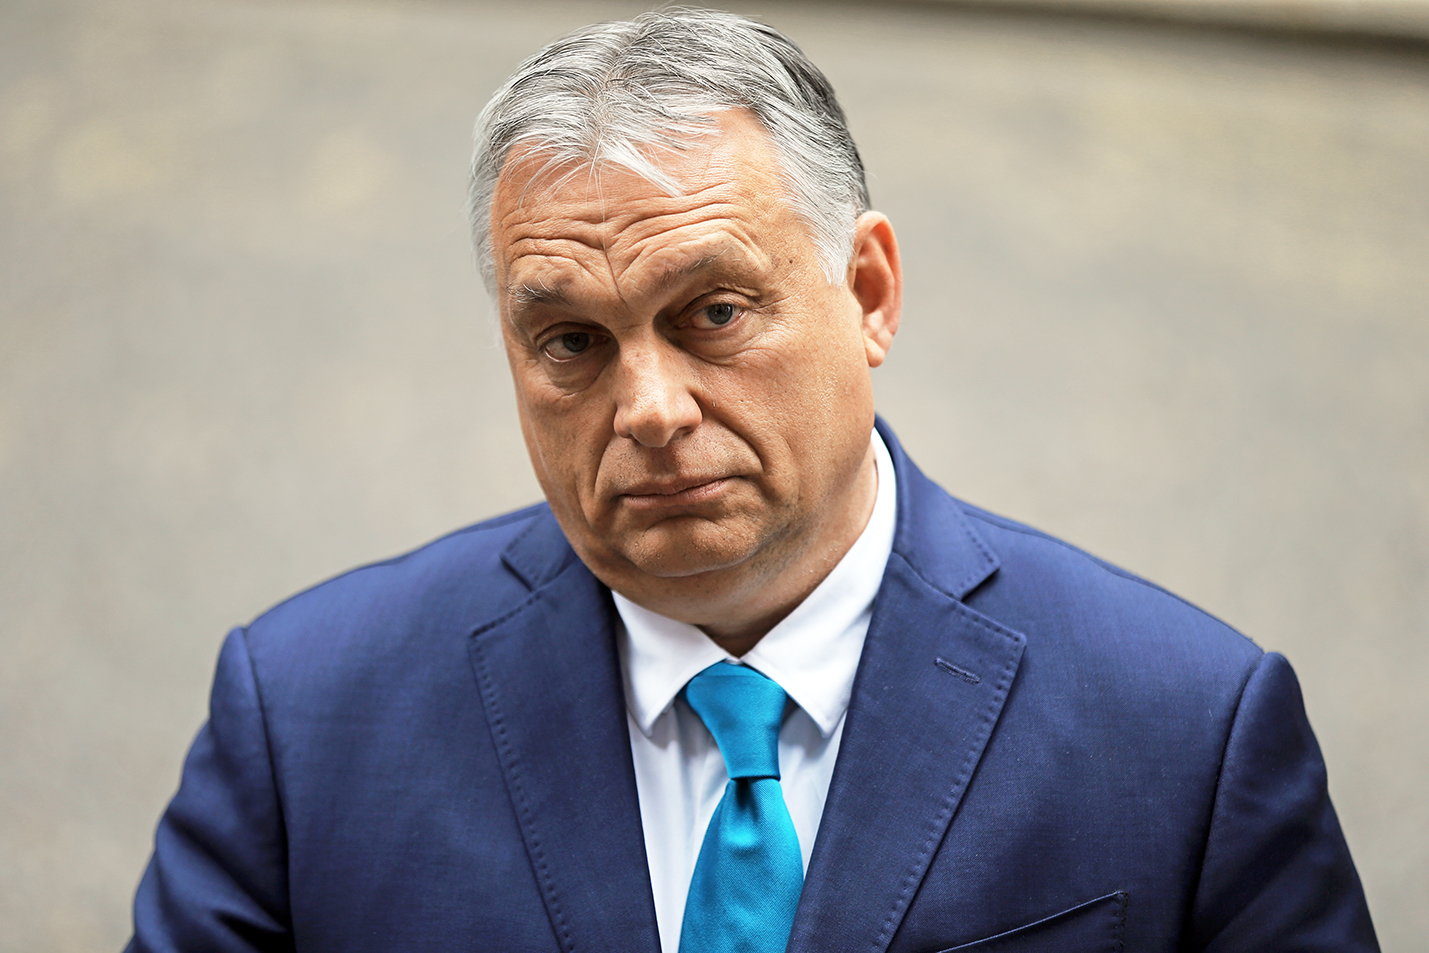 Inflation 'On the Right Path' - Orbán